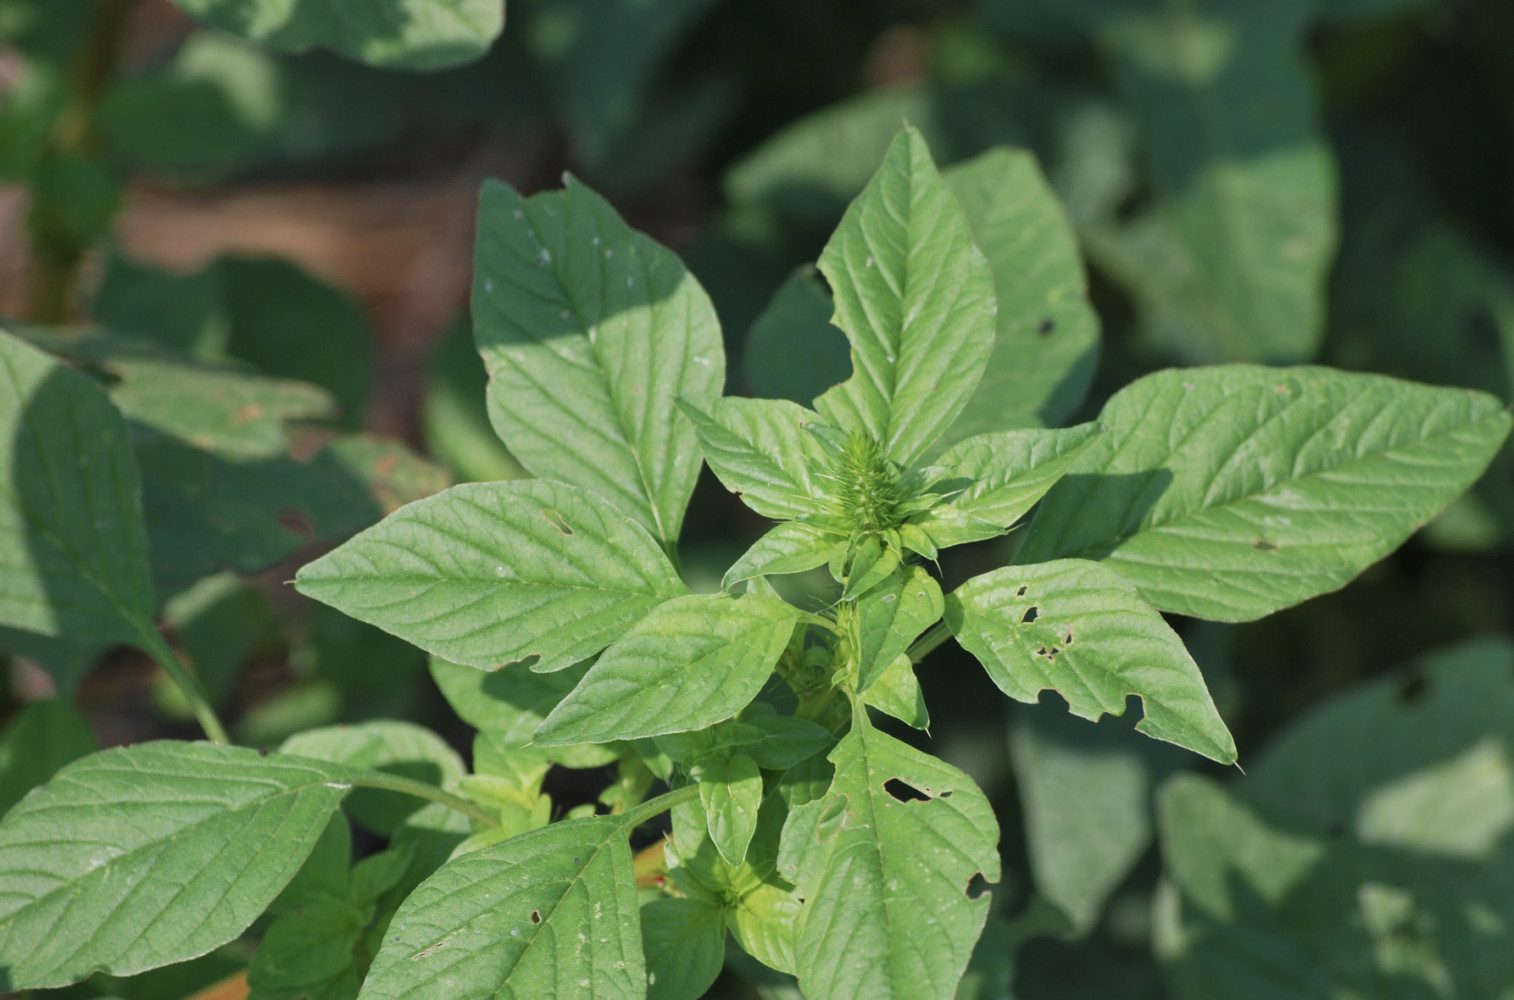 A Clemson geneticist is part of a team that has determined a new means of controlling Palmer amaranth.